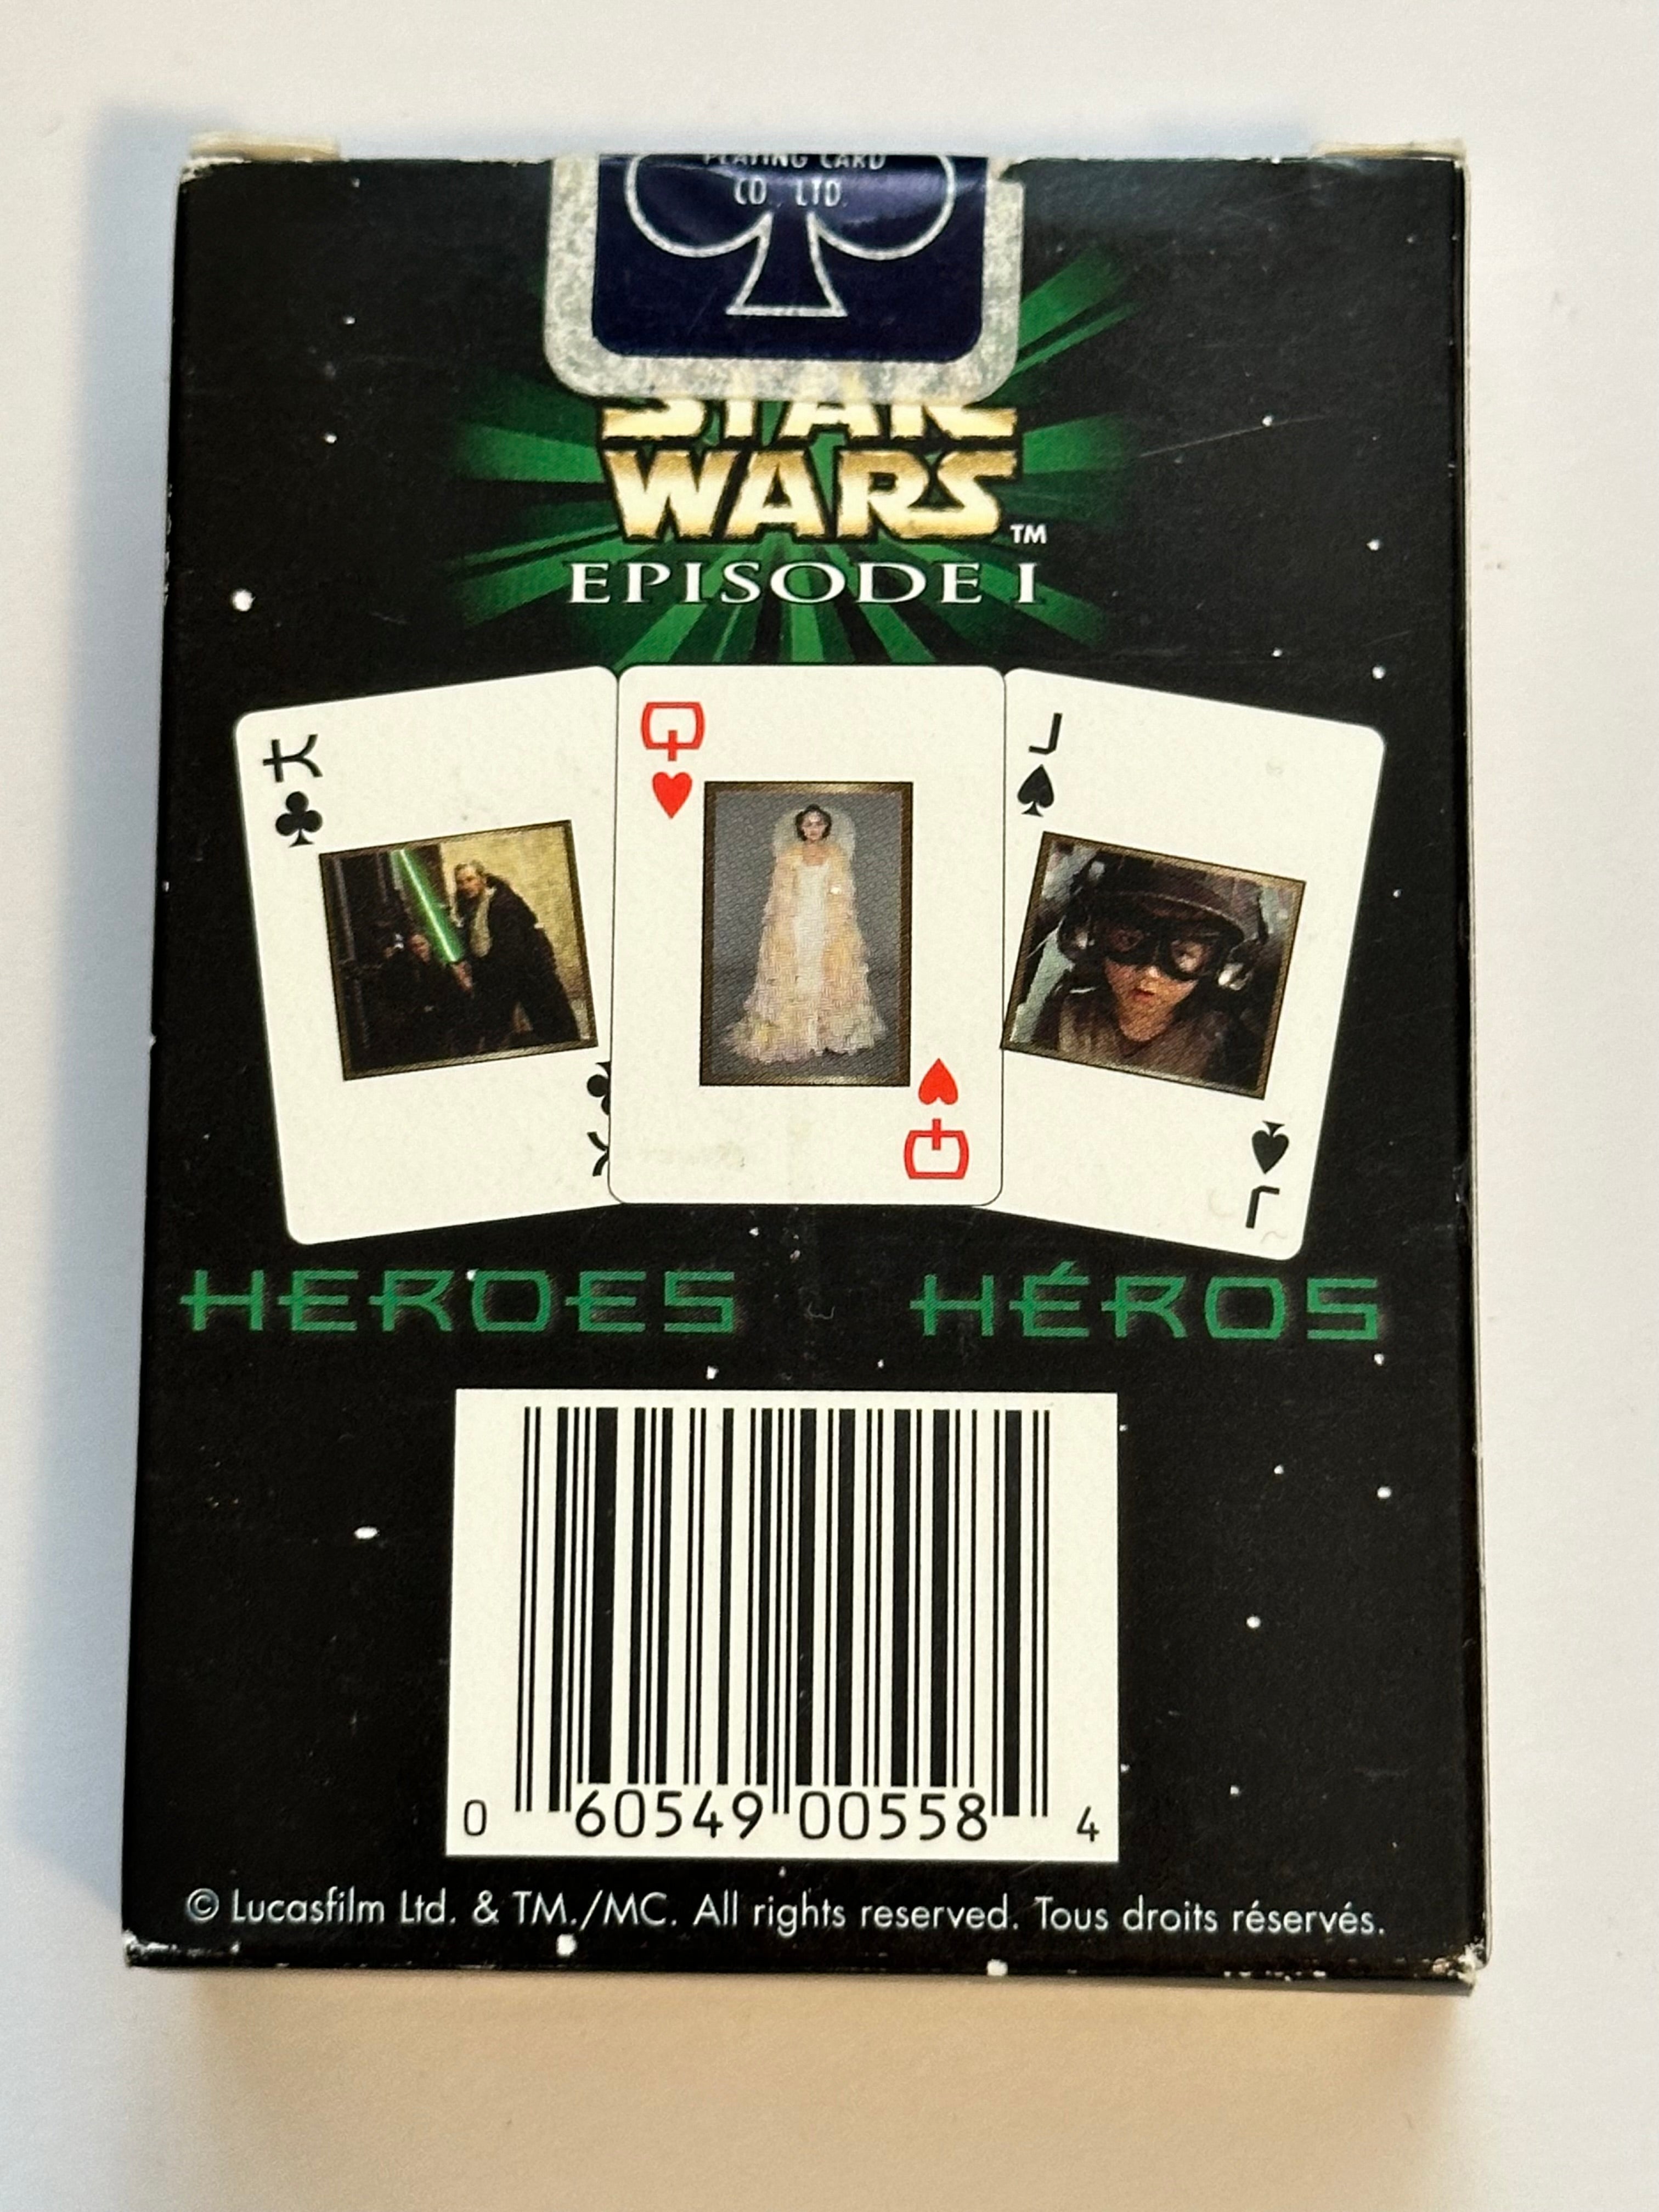 Star Wars episode one vintage playing card deck 1990s